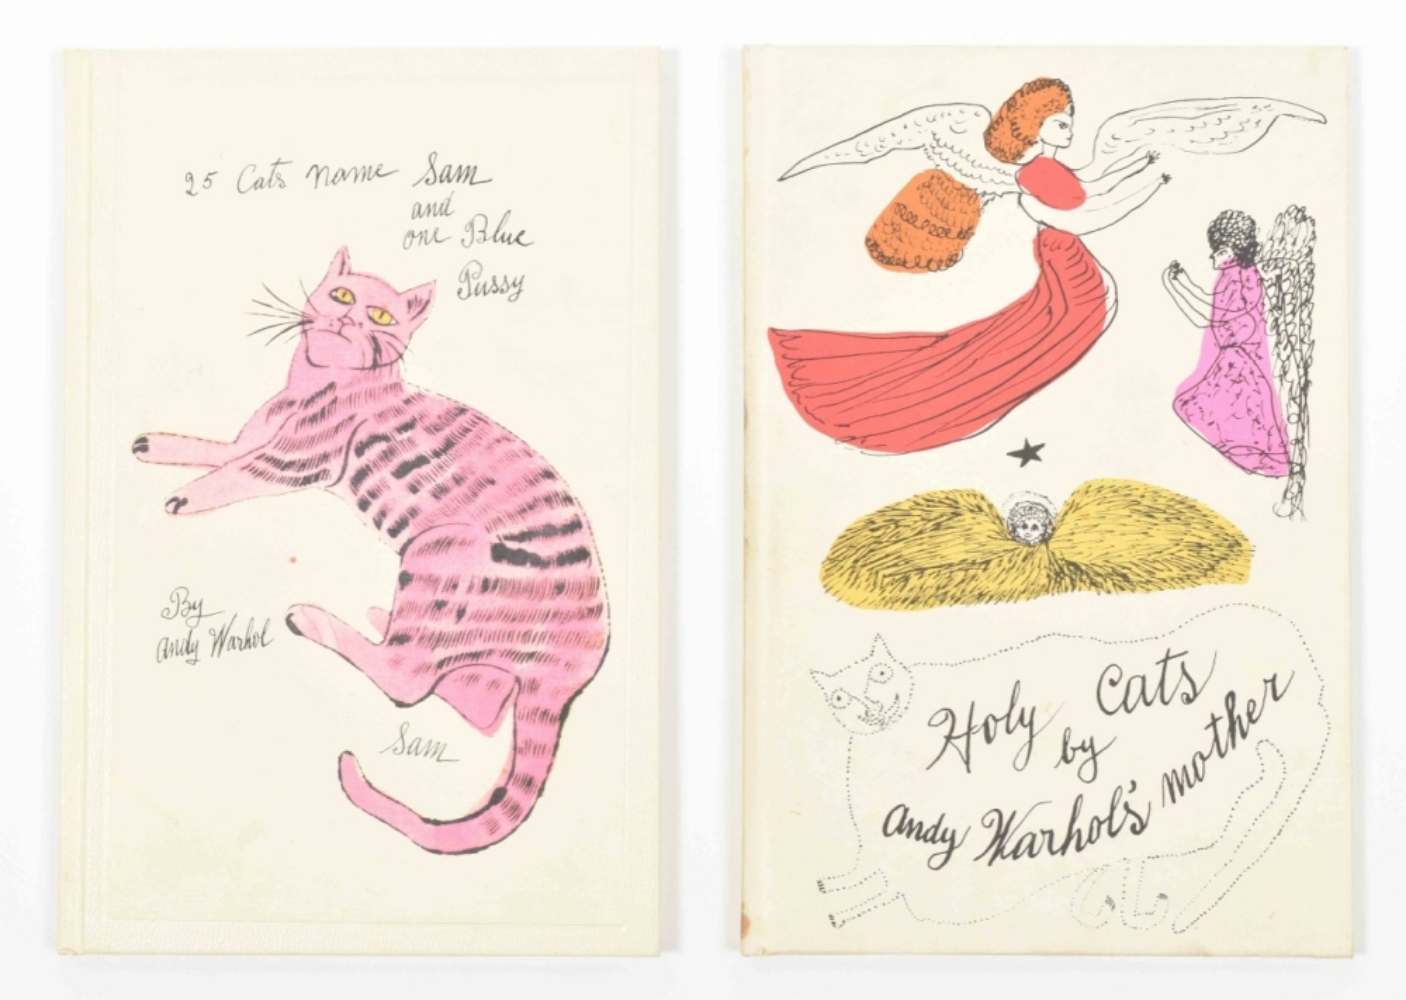 Andy Warhol, 25 Cats Name Sam and One Blue Pussy & Holy Cats by Andy Warhol's Mother - Image 6 of 10